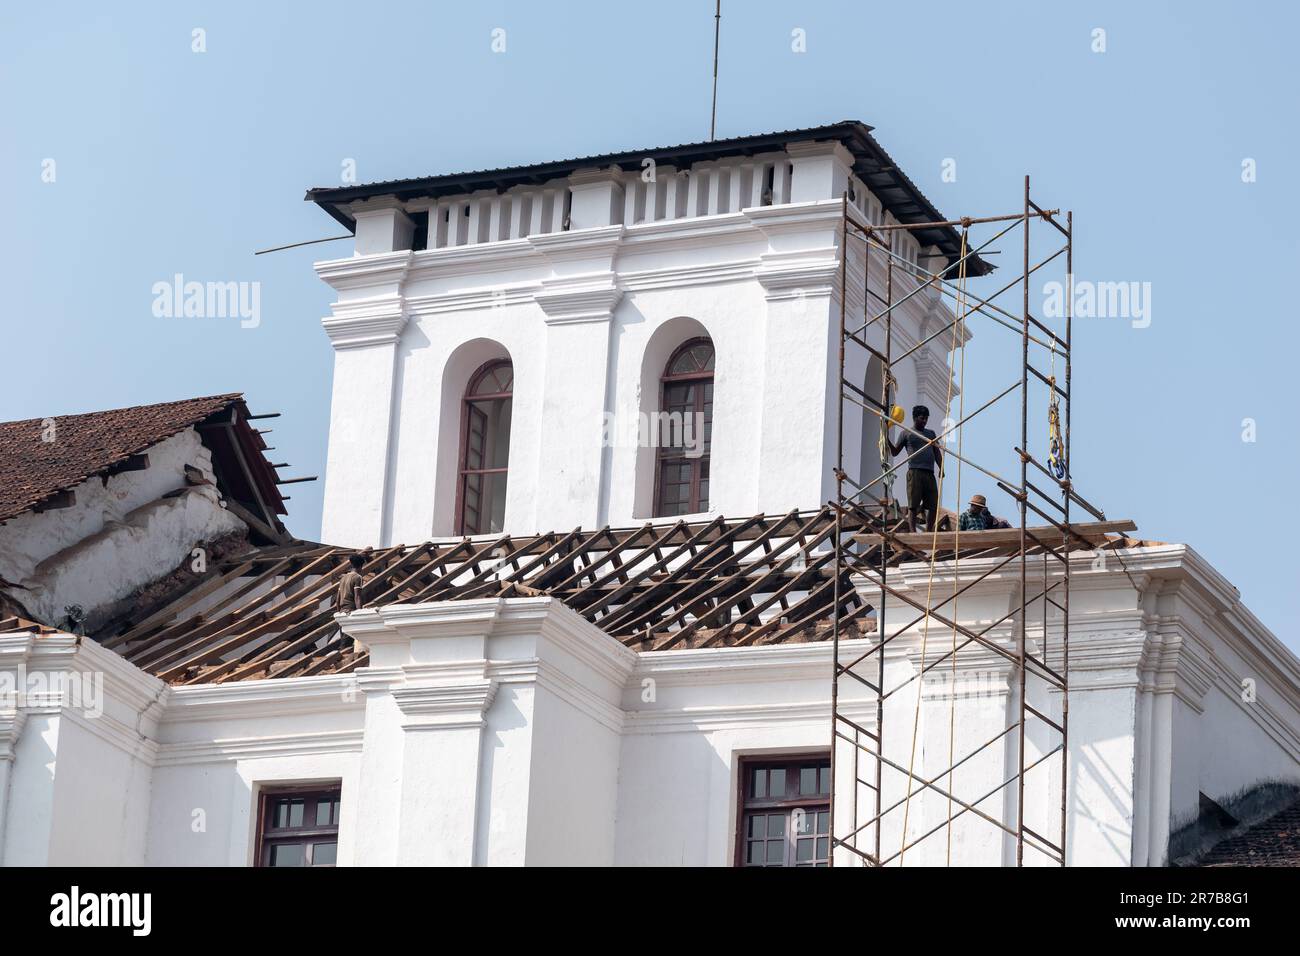 Old Goa, India - January 2023: The ancient Portuguese era St. Francis of Assisi church under repair and restoration in the UNESCO heritage site of Old Stock Photo